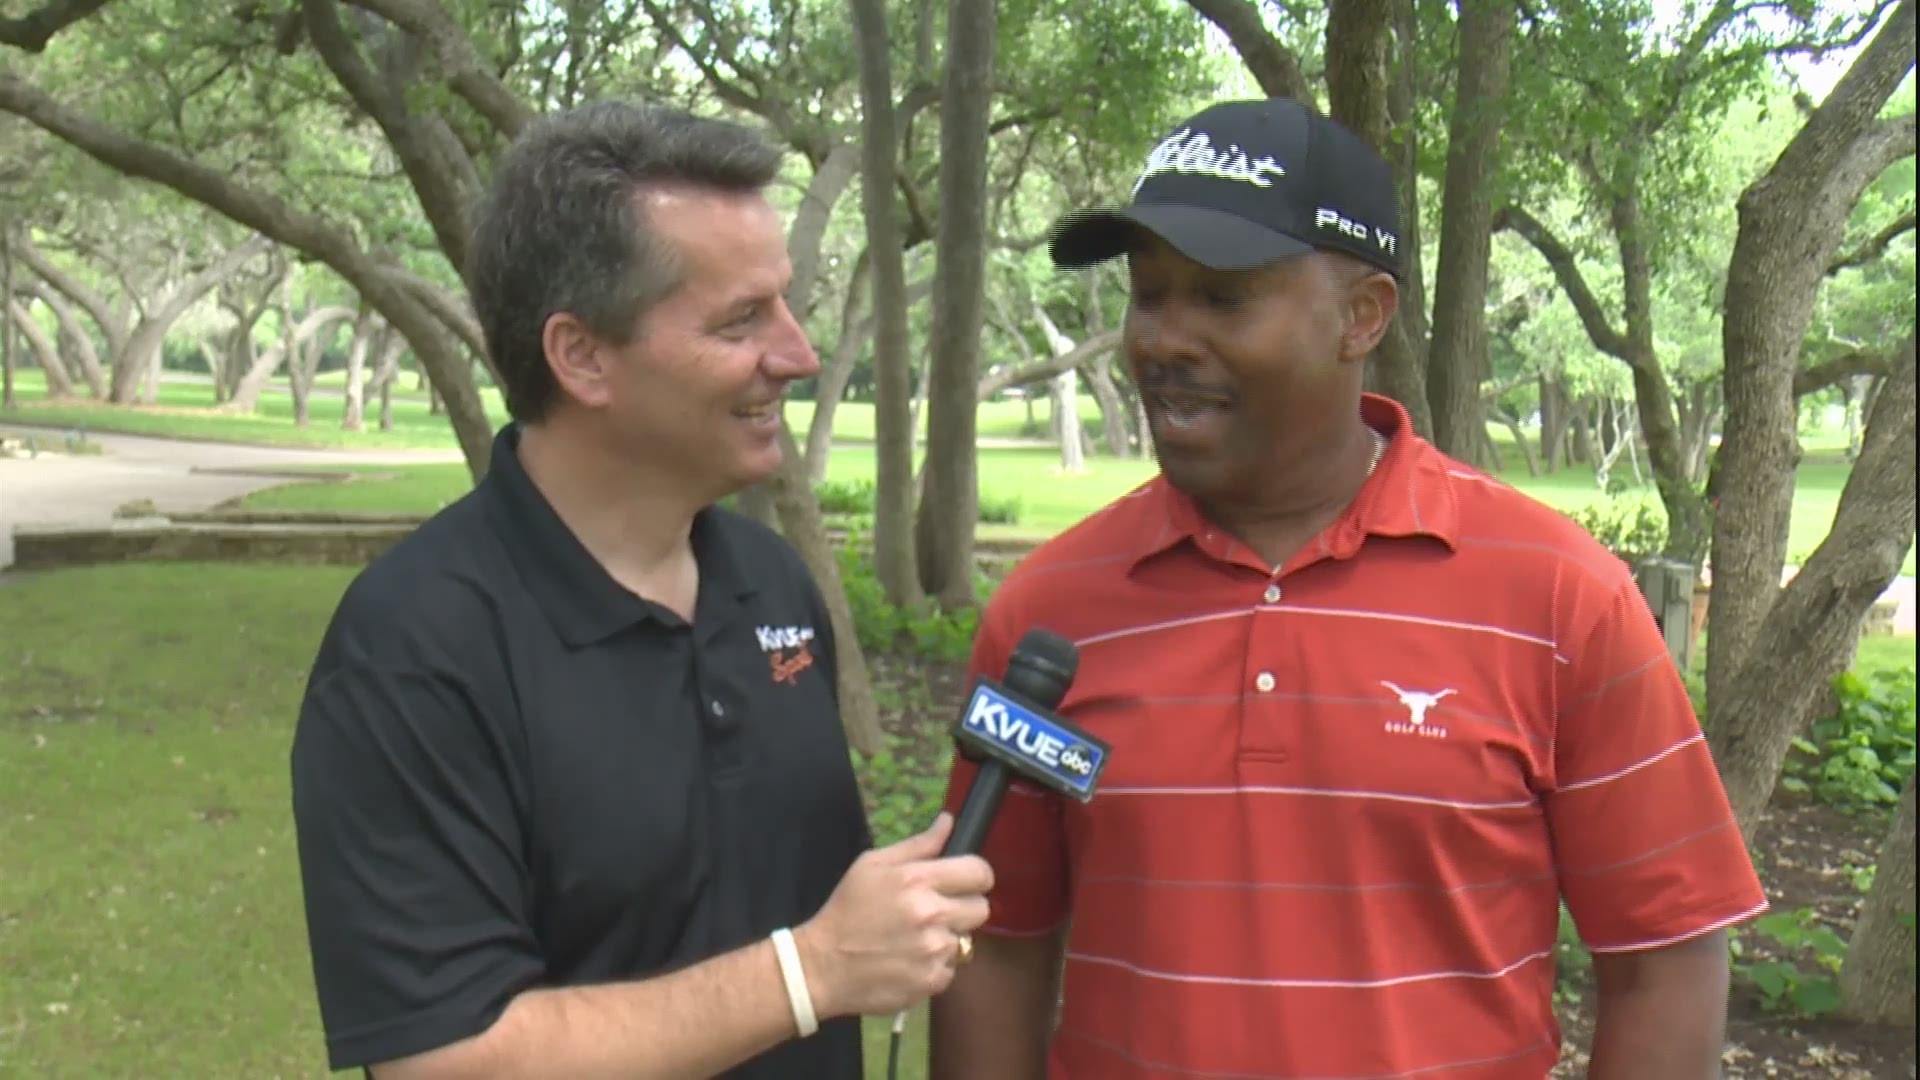 KVUE's Mike Barnes talks with former UT running back Johnny Walker who earned the nickname "Sky Walker" with the TD dives!